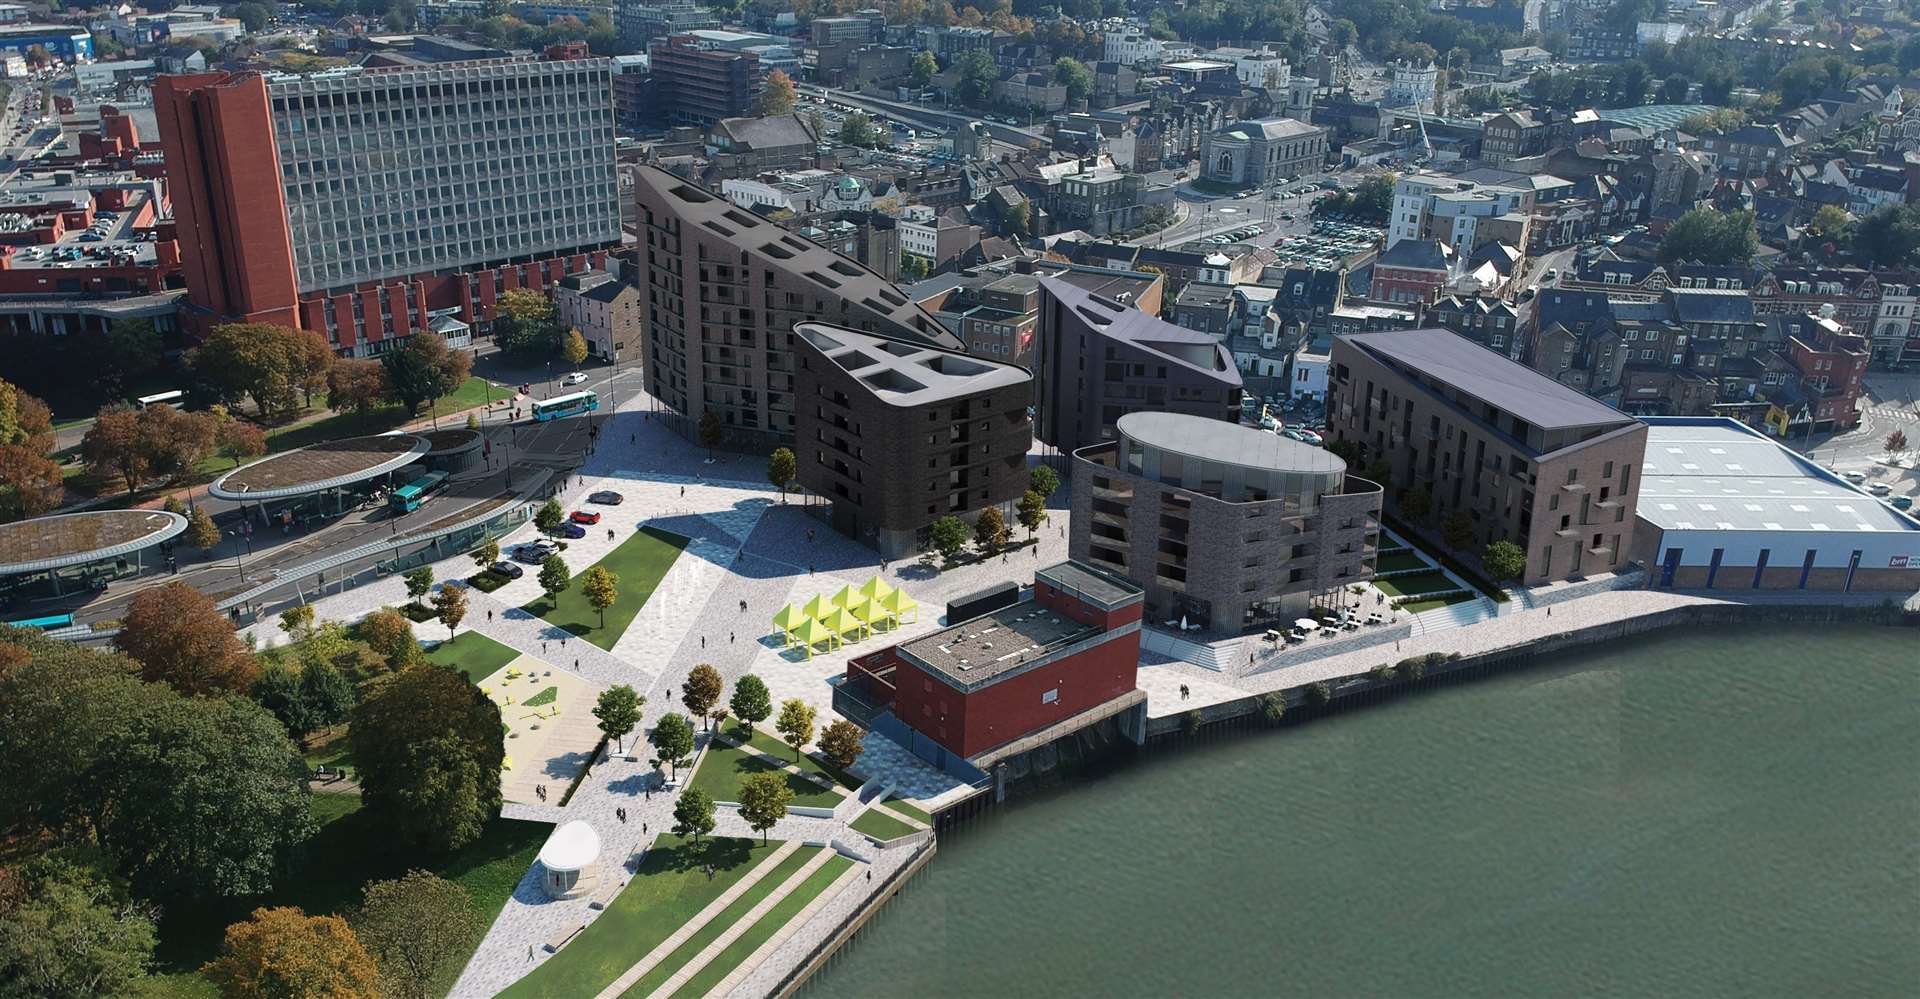 An artist's impression of what the final Chatham Waterfront development will look like.